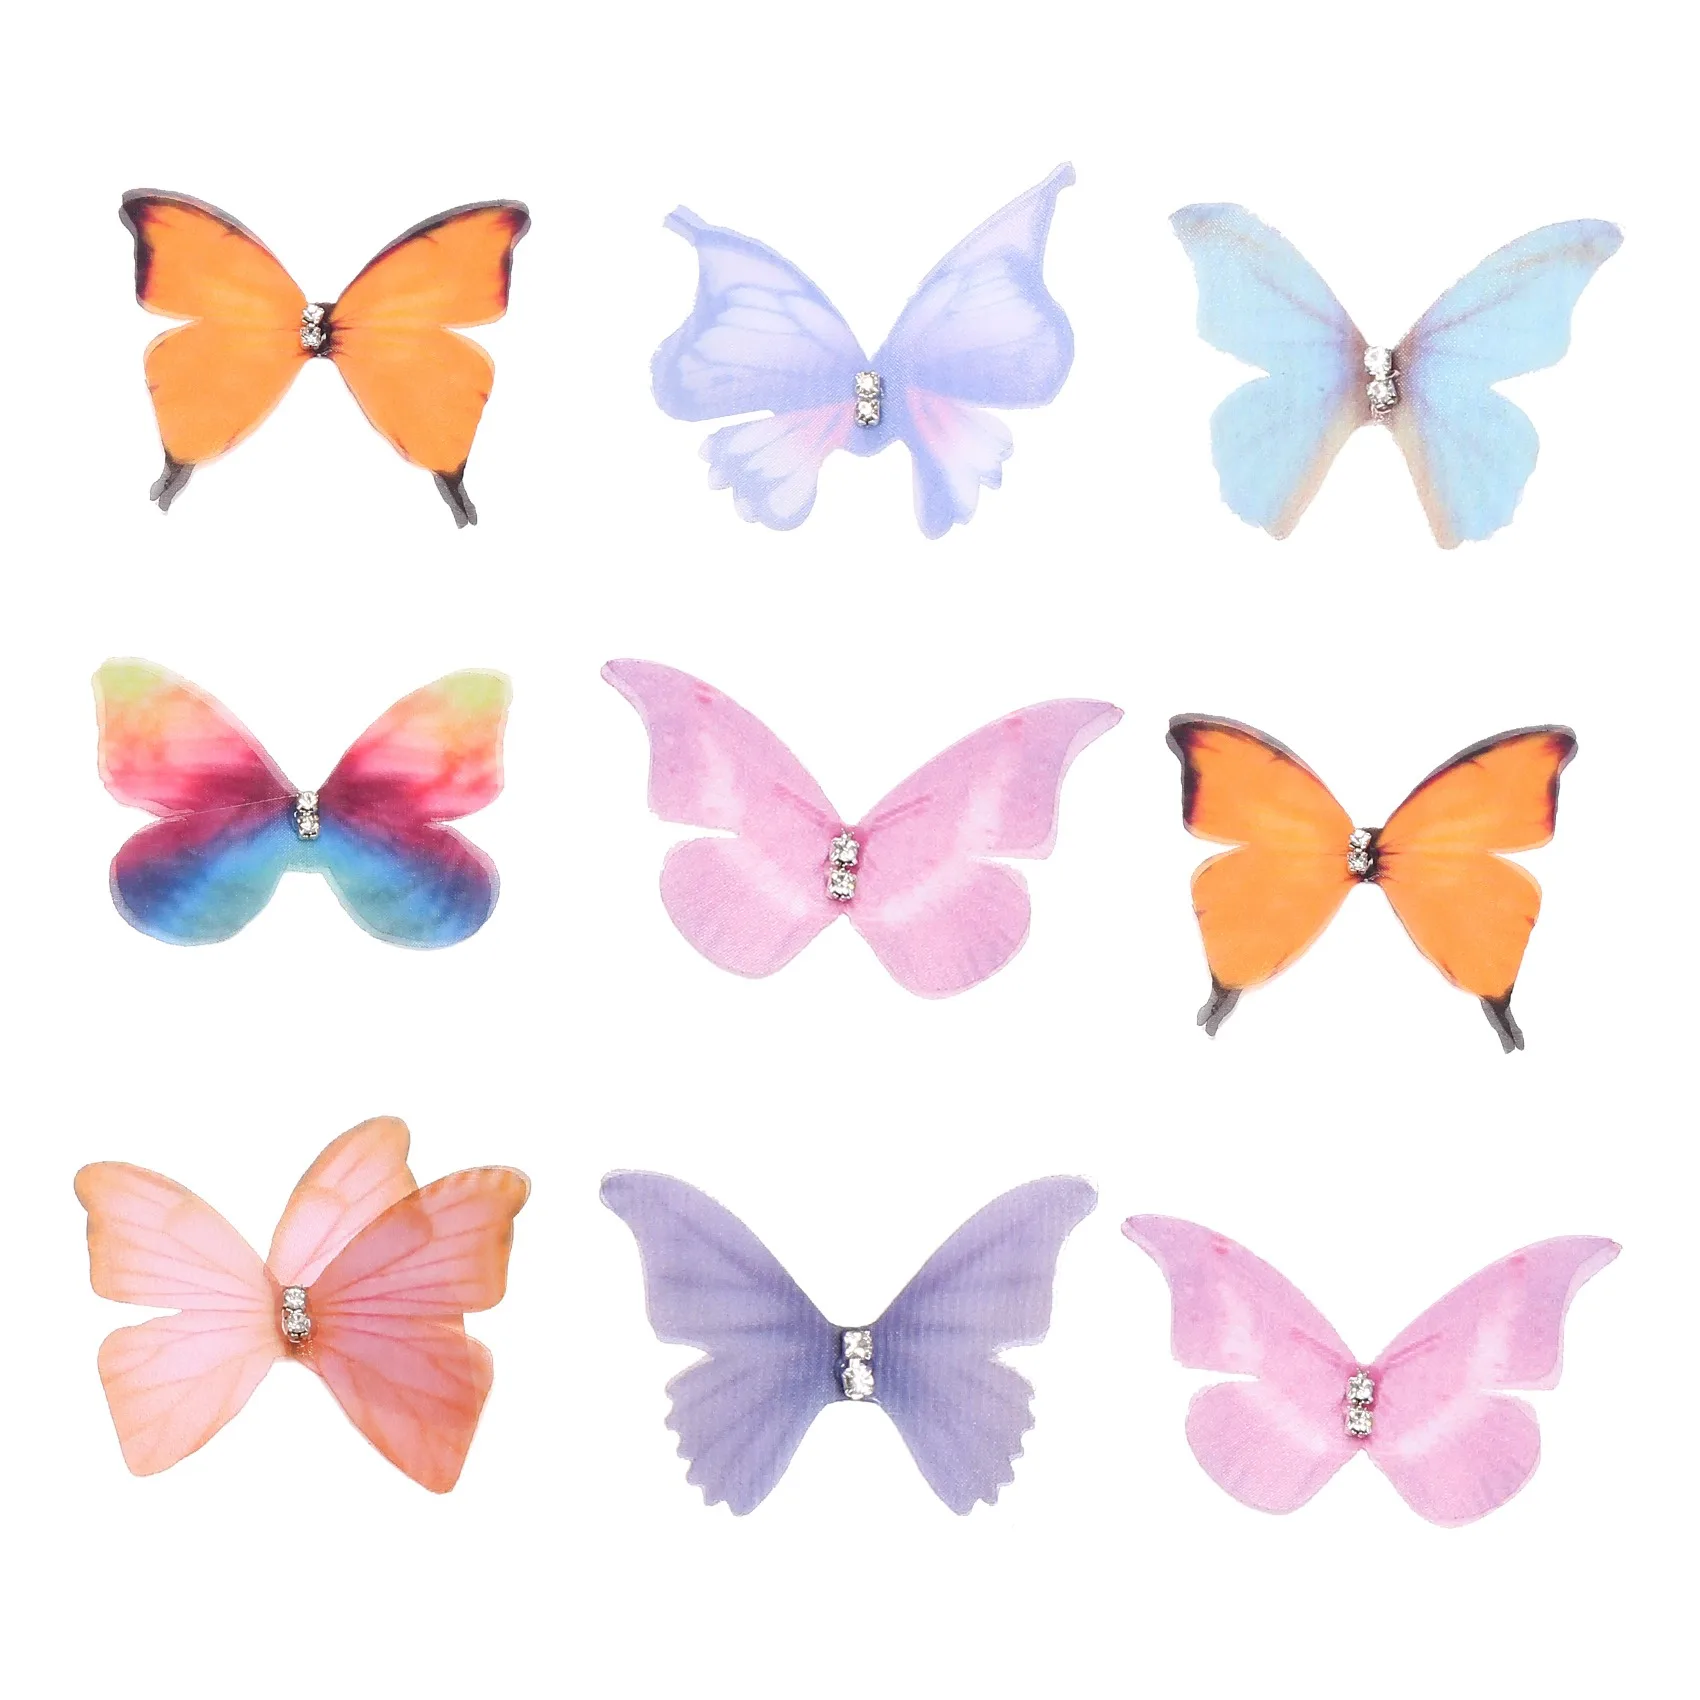 

50Pcs Gradient Color Organza Fabric Butterfly Appliques 38Mm Translucent Chiffon Butterfly for Party Decor, Doll Embellishment